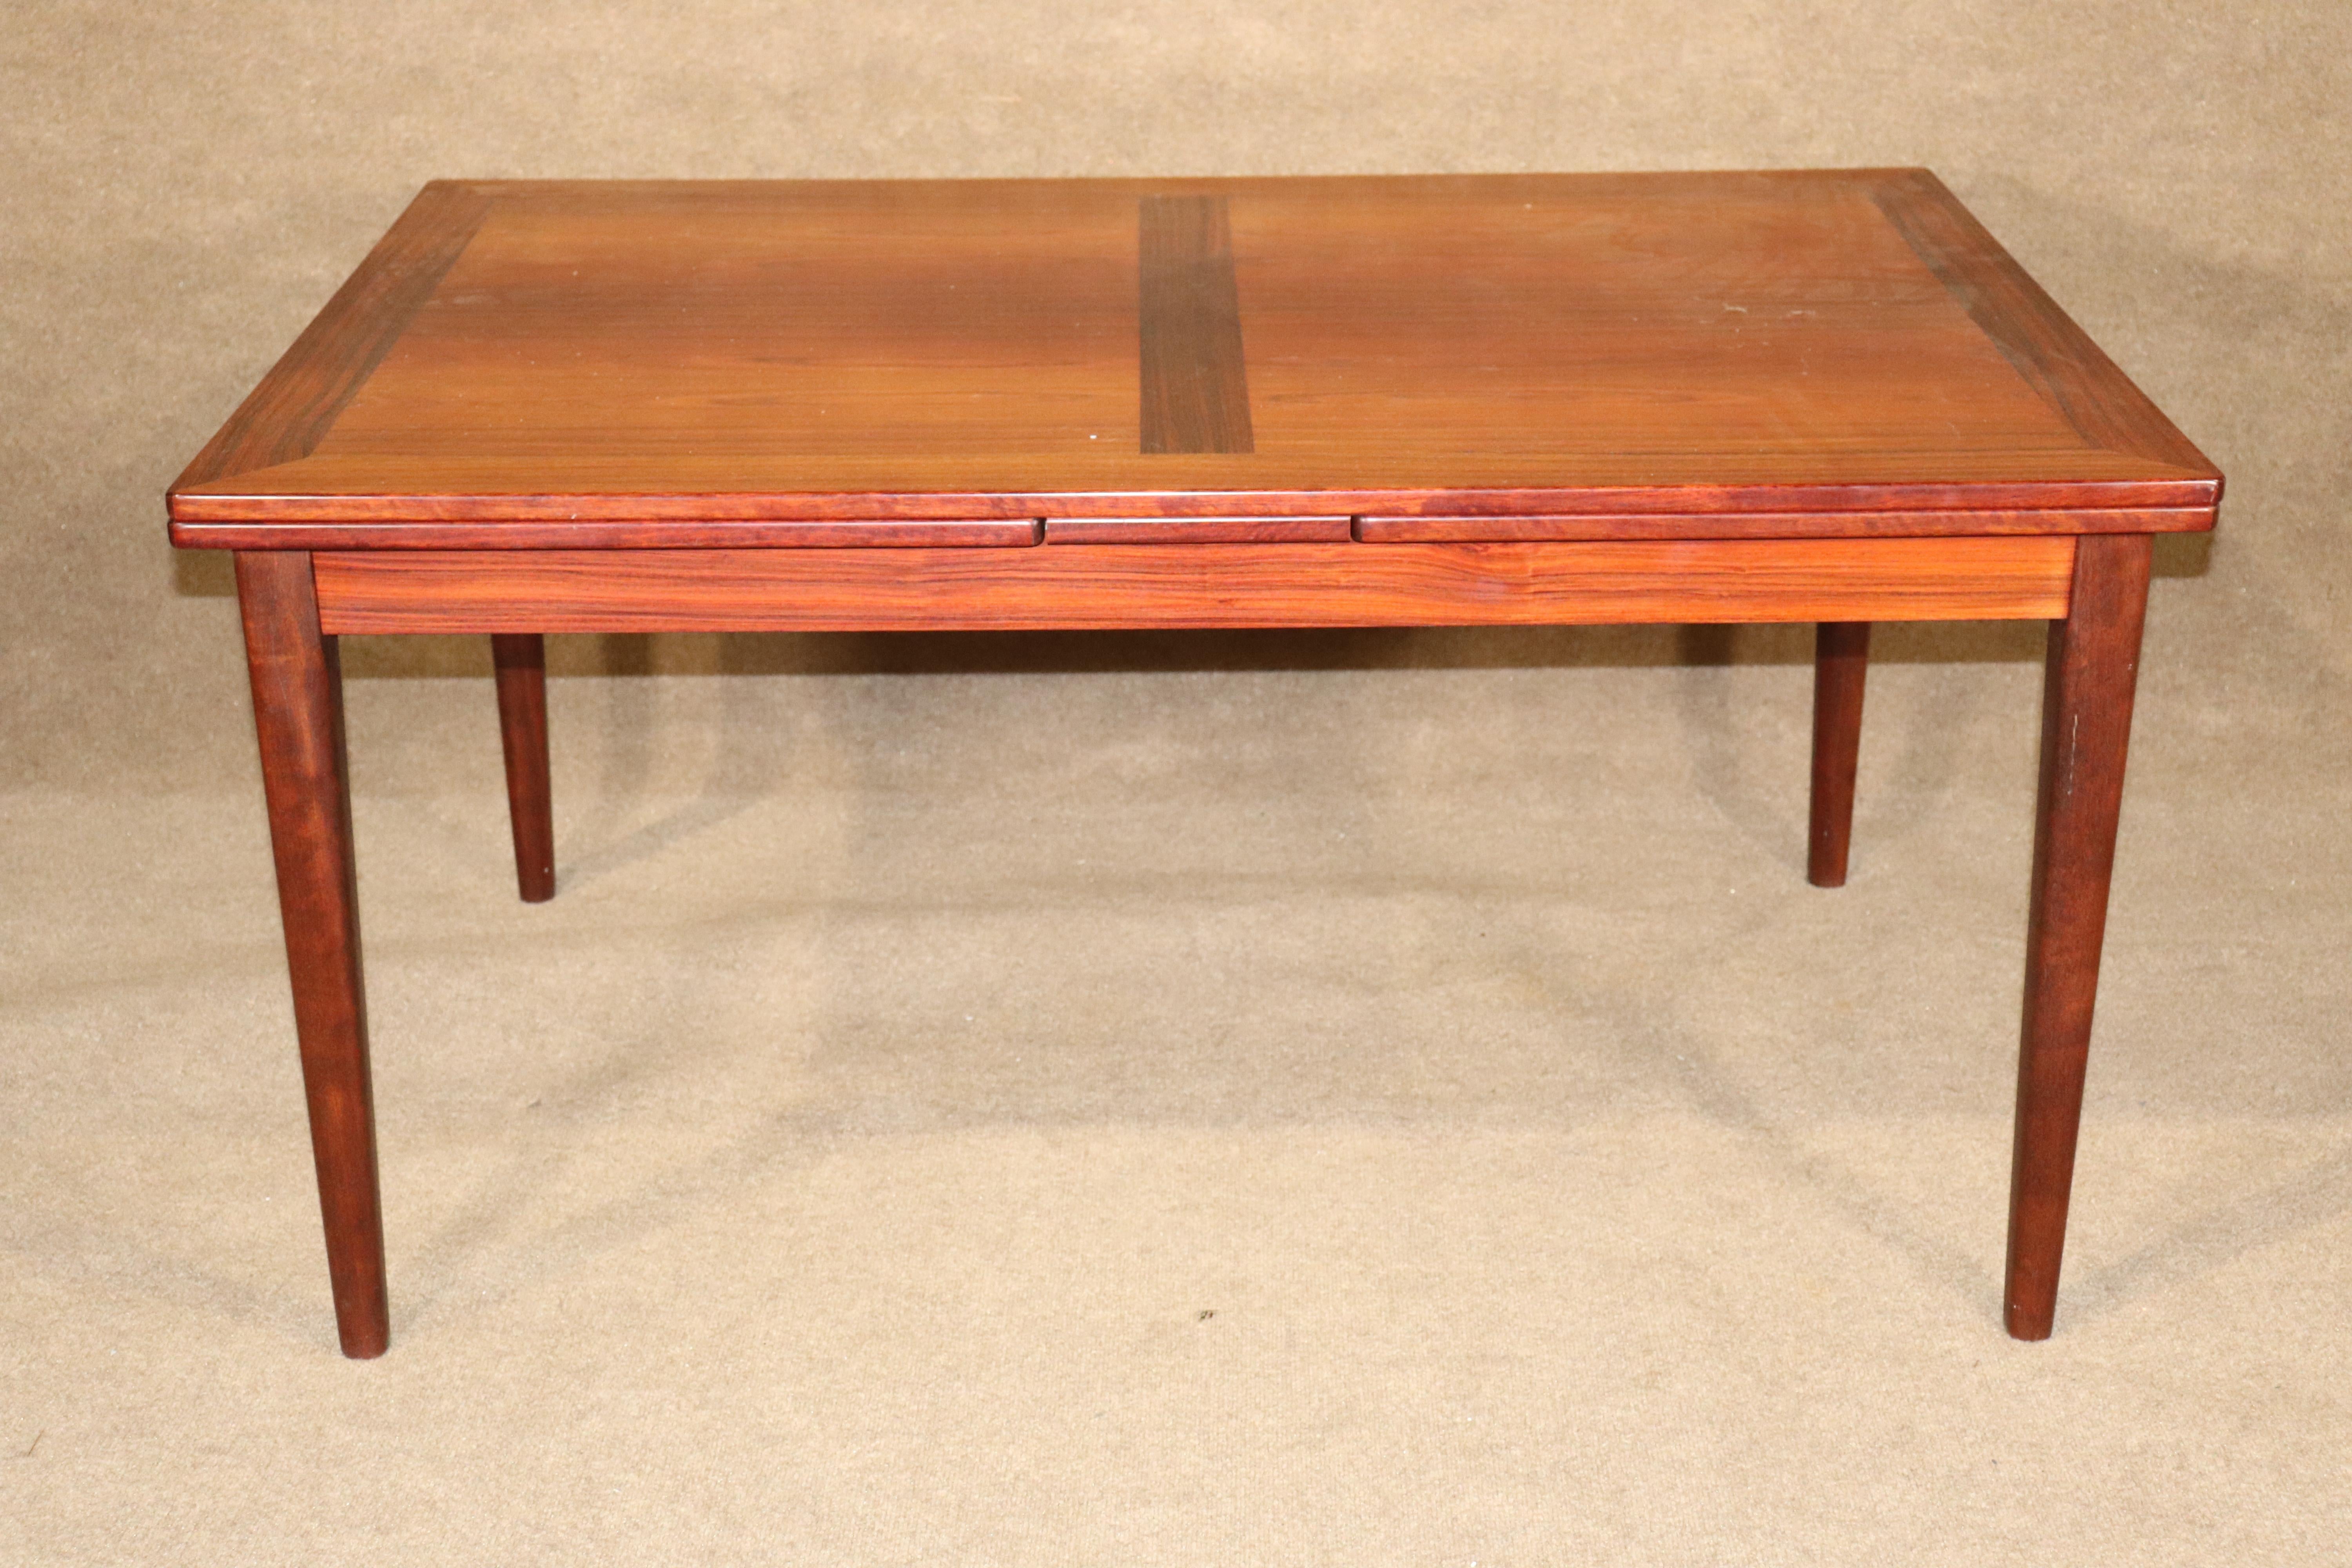 Danish made dining table in rich rosewood grain. Two leaves hide underneath the table top and are easily pulled out to extend the surface to 102